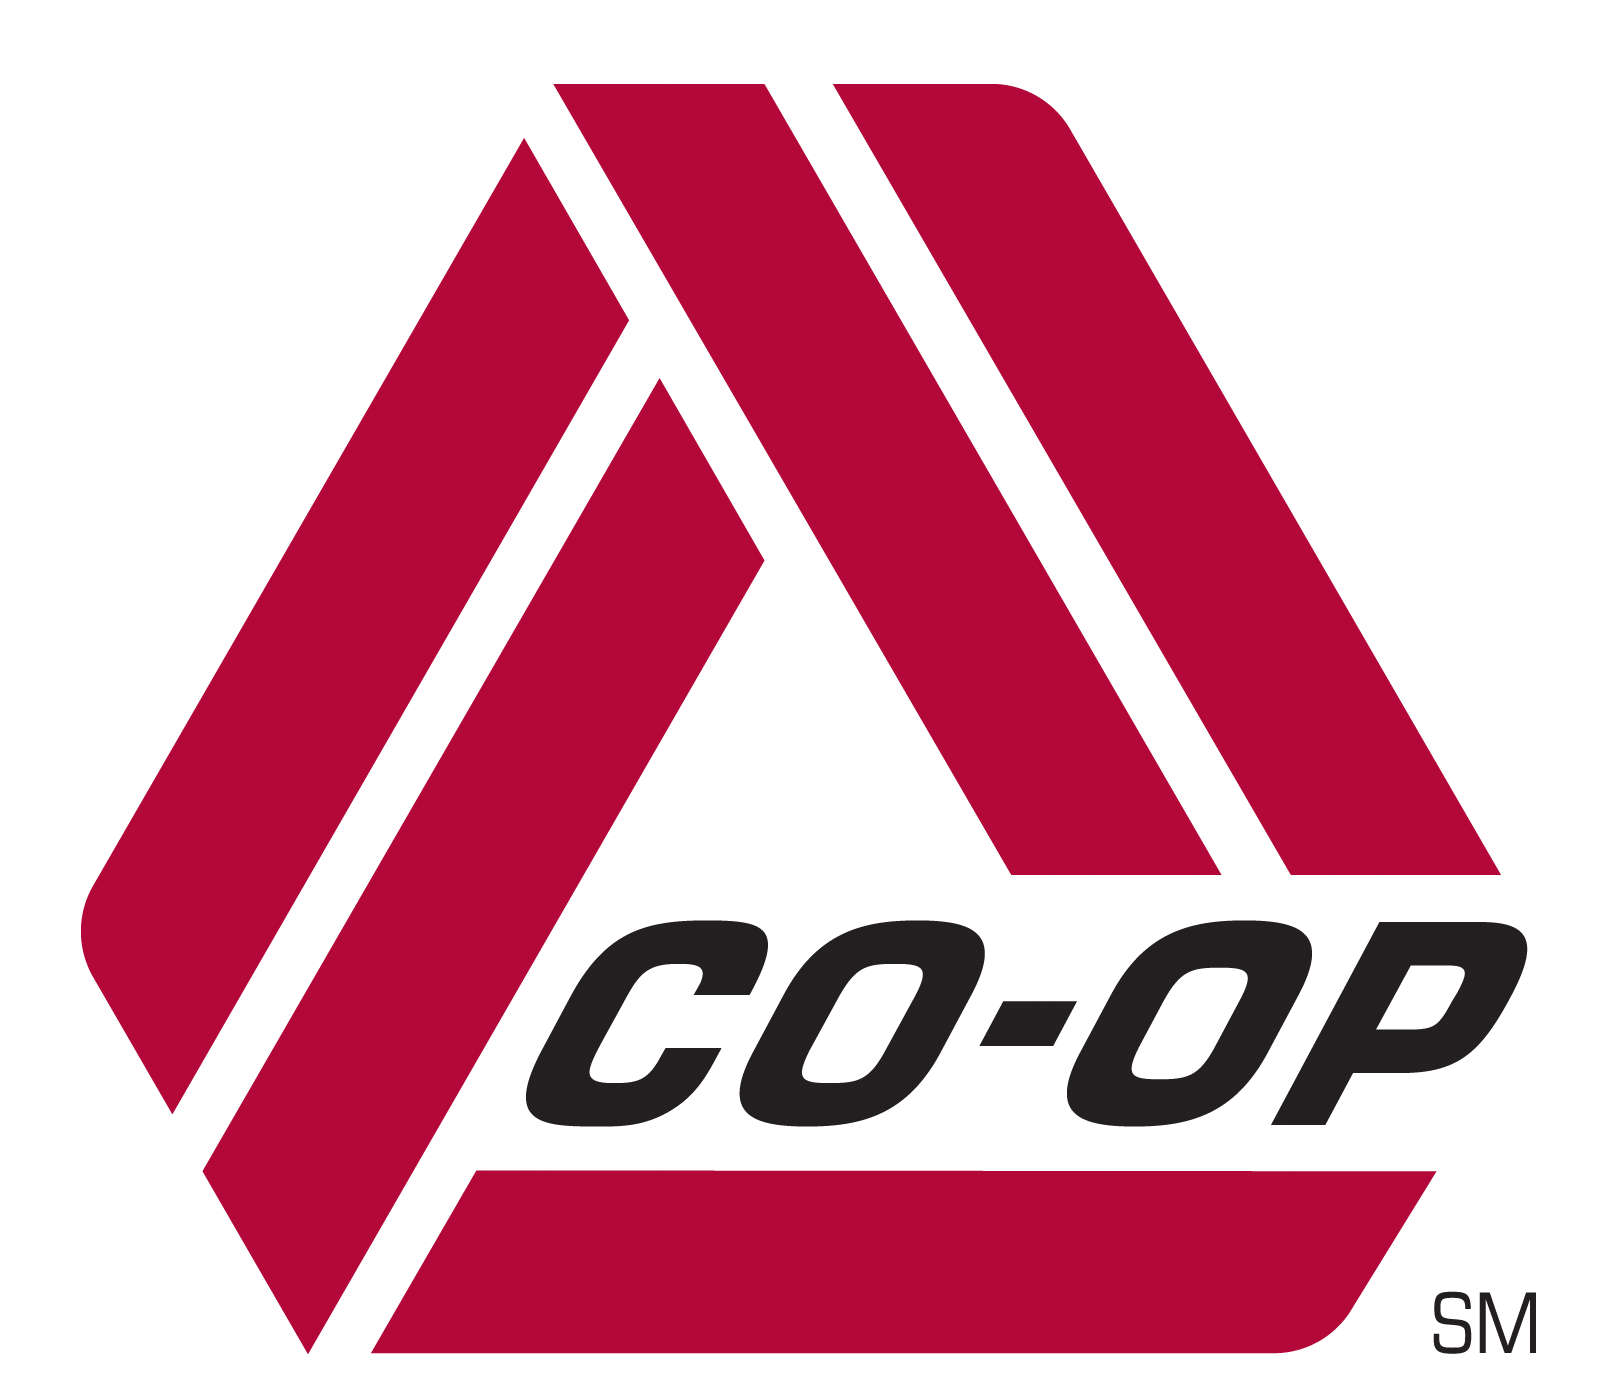 co-op logo red triangle with double lines